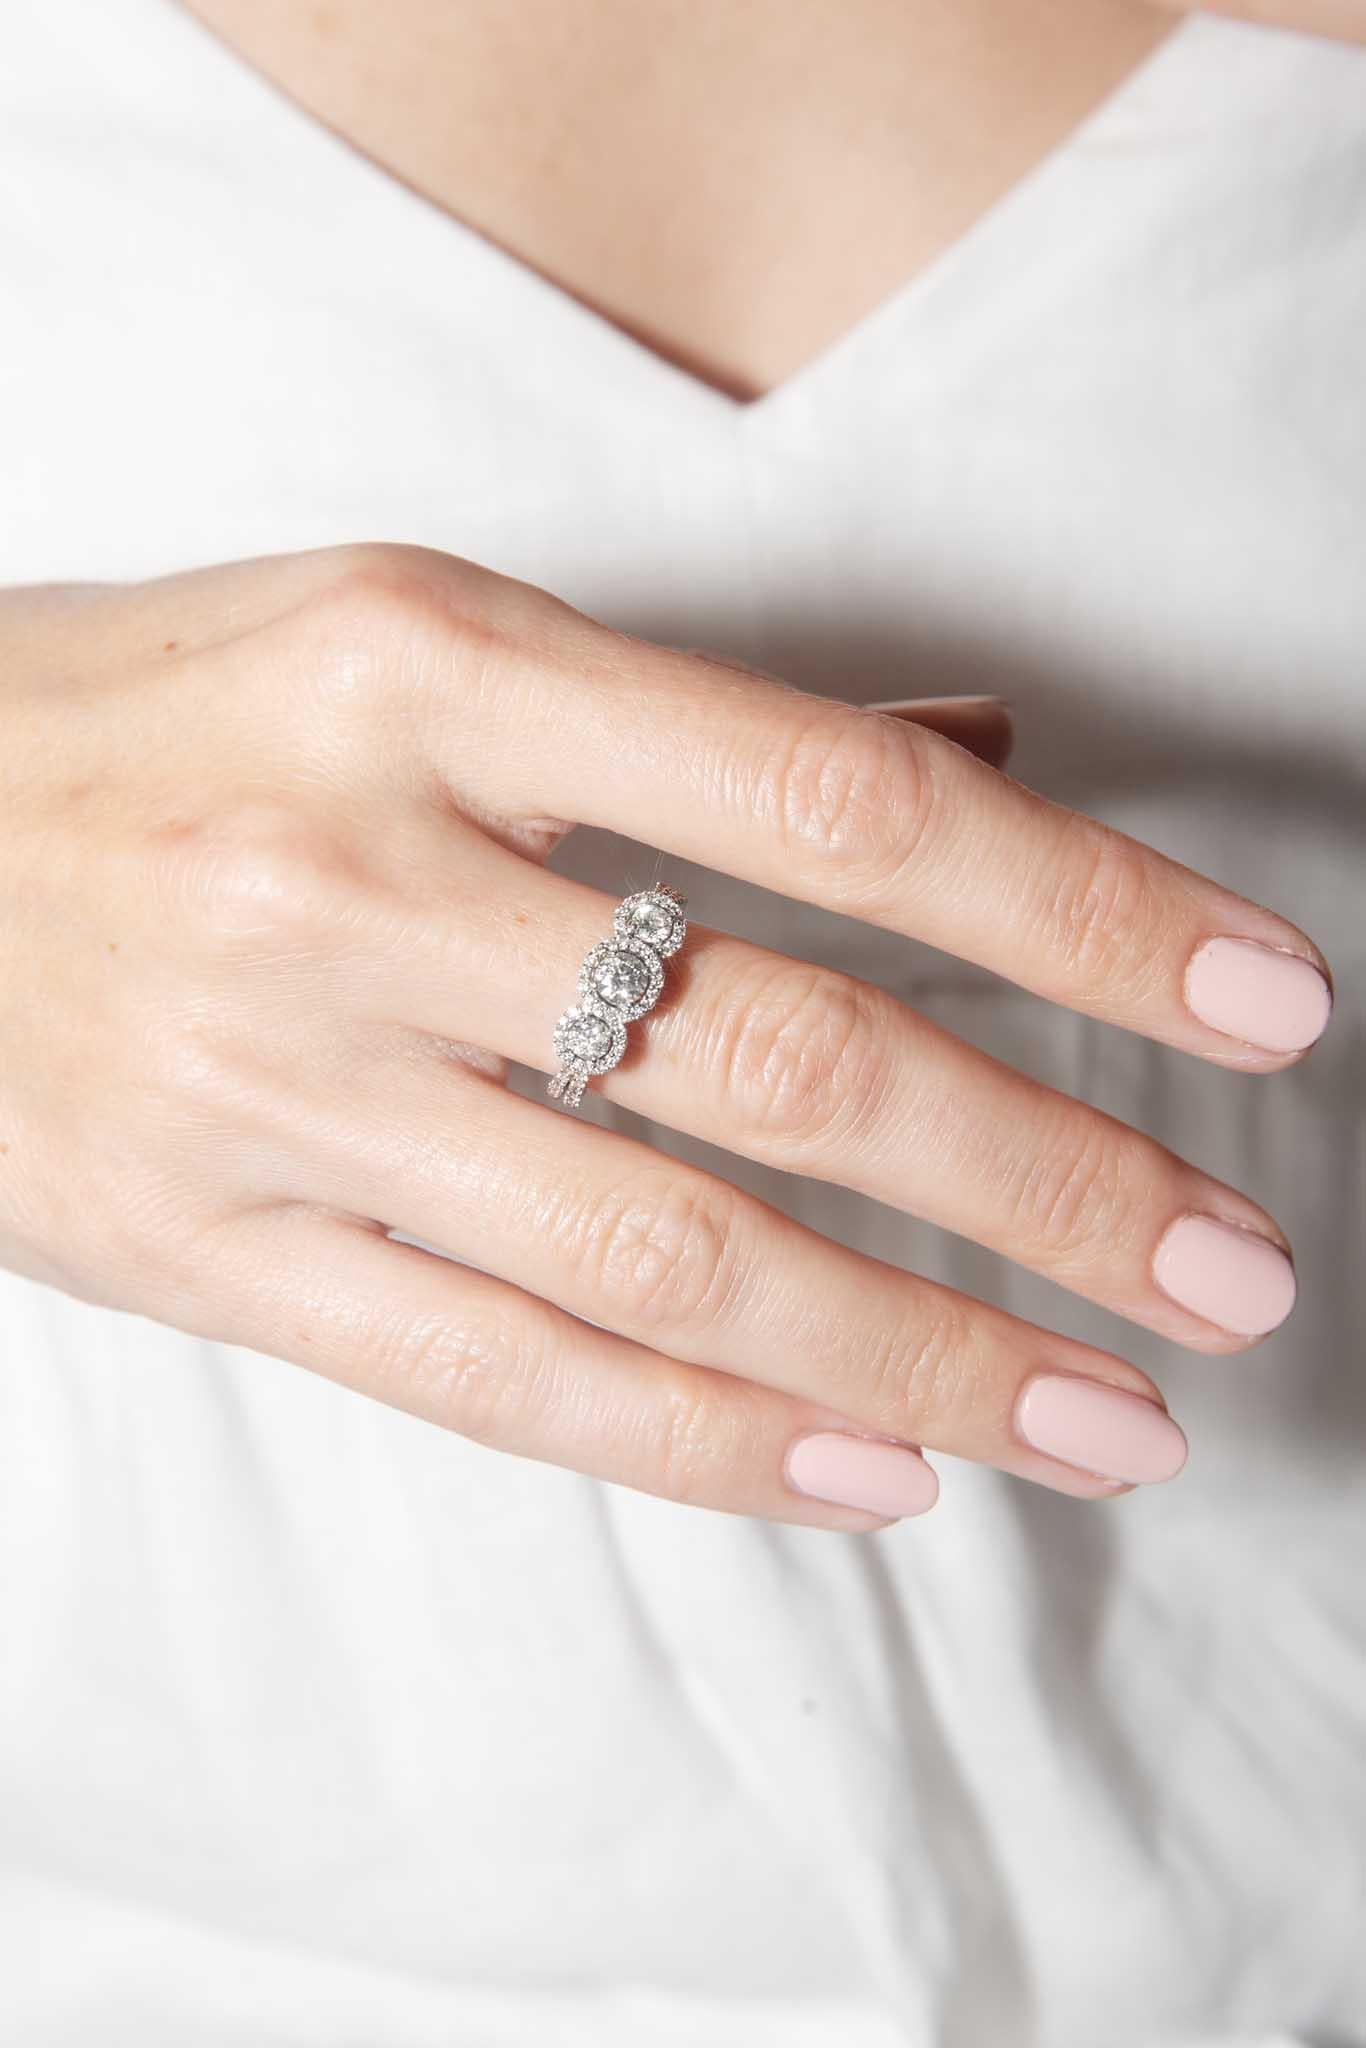 Crafted in 18 carat white gold with haloed clusters of sparkling diamonds, The Zoey Ring is a stunning adornment.  Her shine is perfect for the one who, for you, shines the brightest.

The Zoey Ring Gem Details
The three centre diamonds are